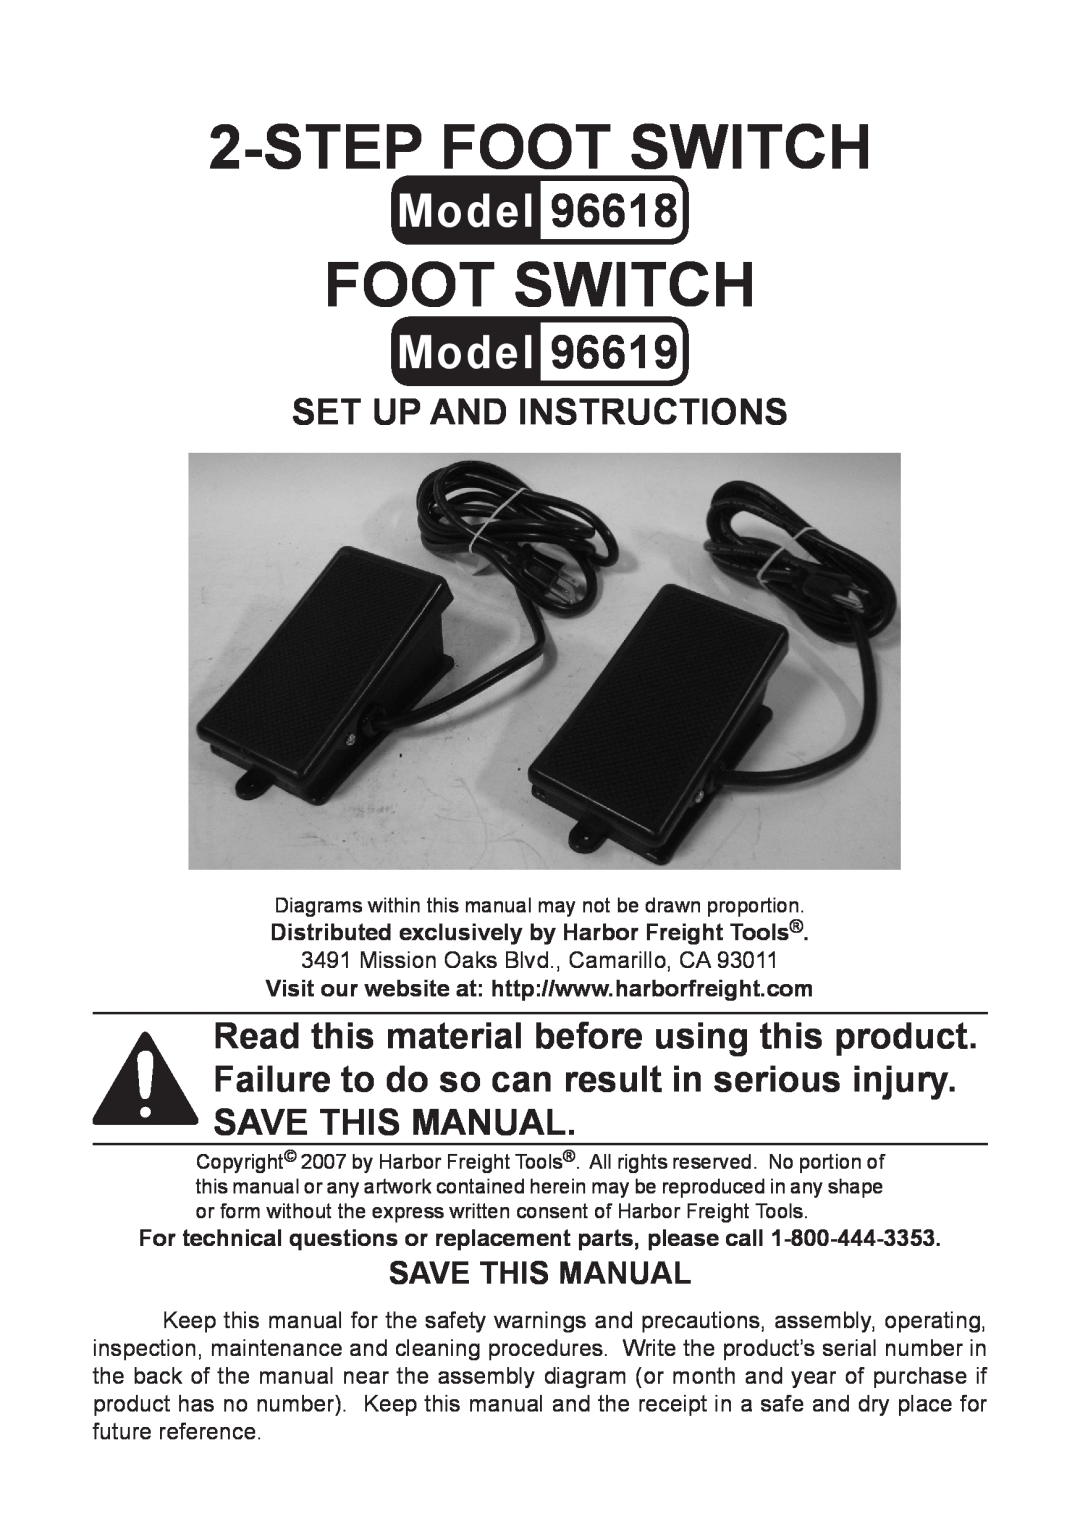 Harbor Freight Tools 96618 manual Save This Manual, Step Foot Switch, Model, Set up AND Instructions 